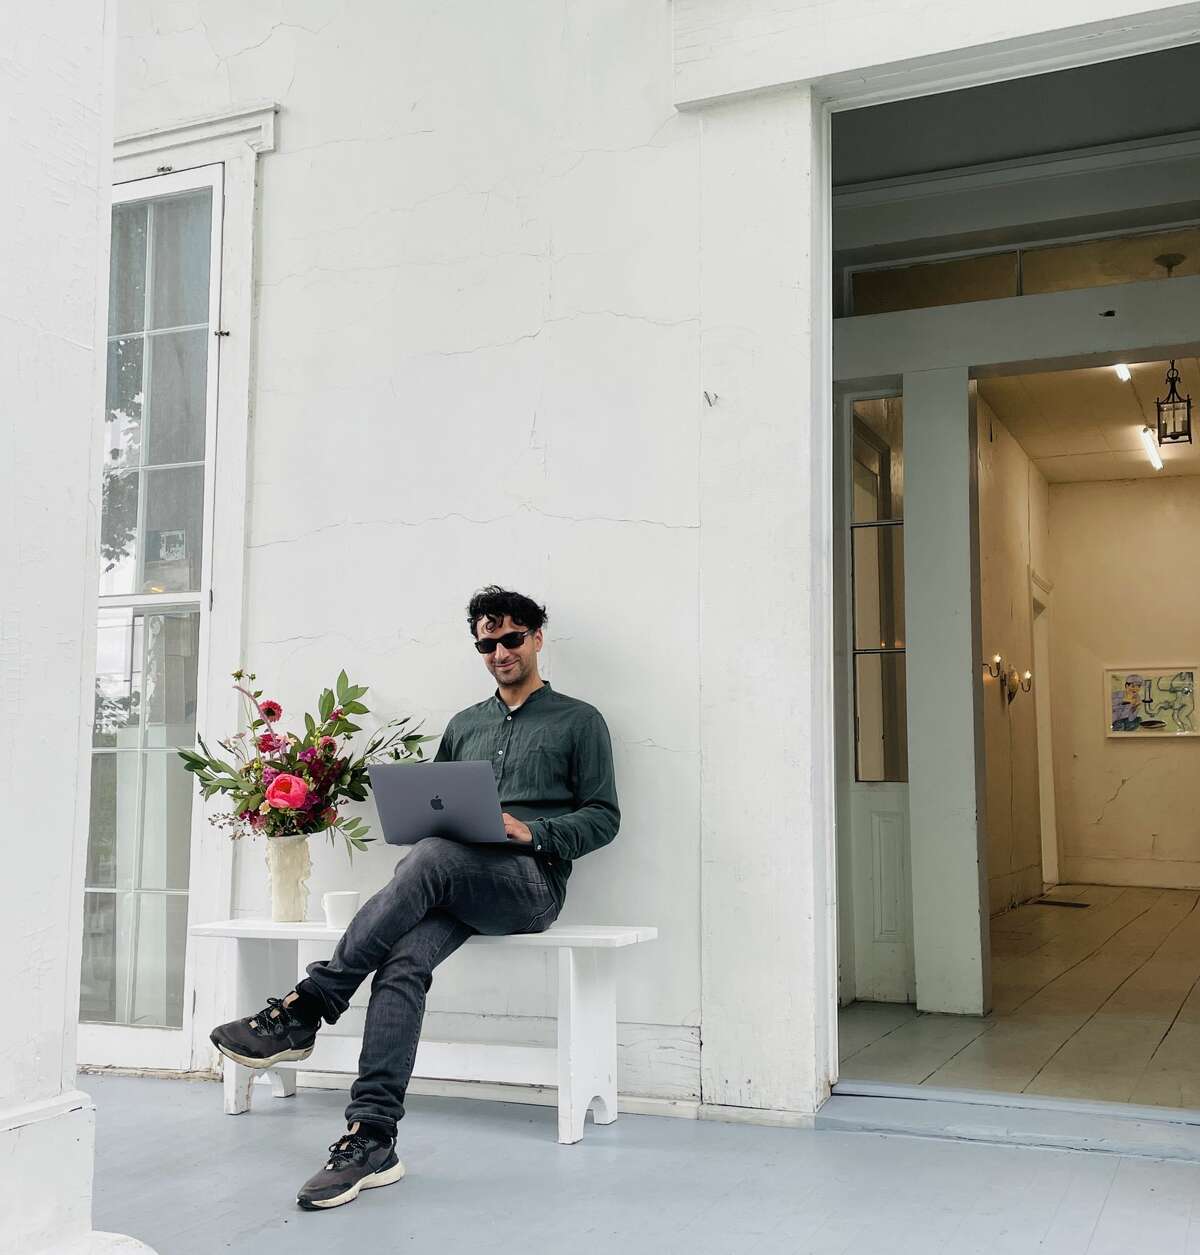 Jesse Greenberg turned a house on Warren Street in Hudson into a place for exhibitions. It's zoned for commercial use, and he plans to transform it into a full-fledged art center called, simply, Hudson House.